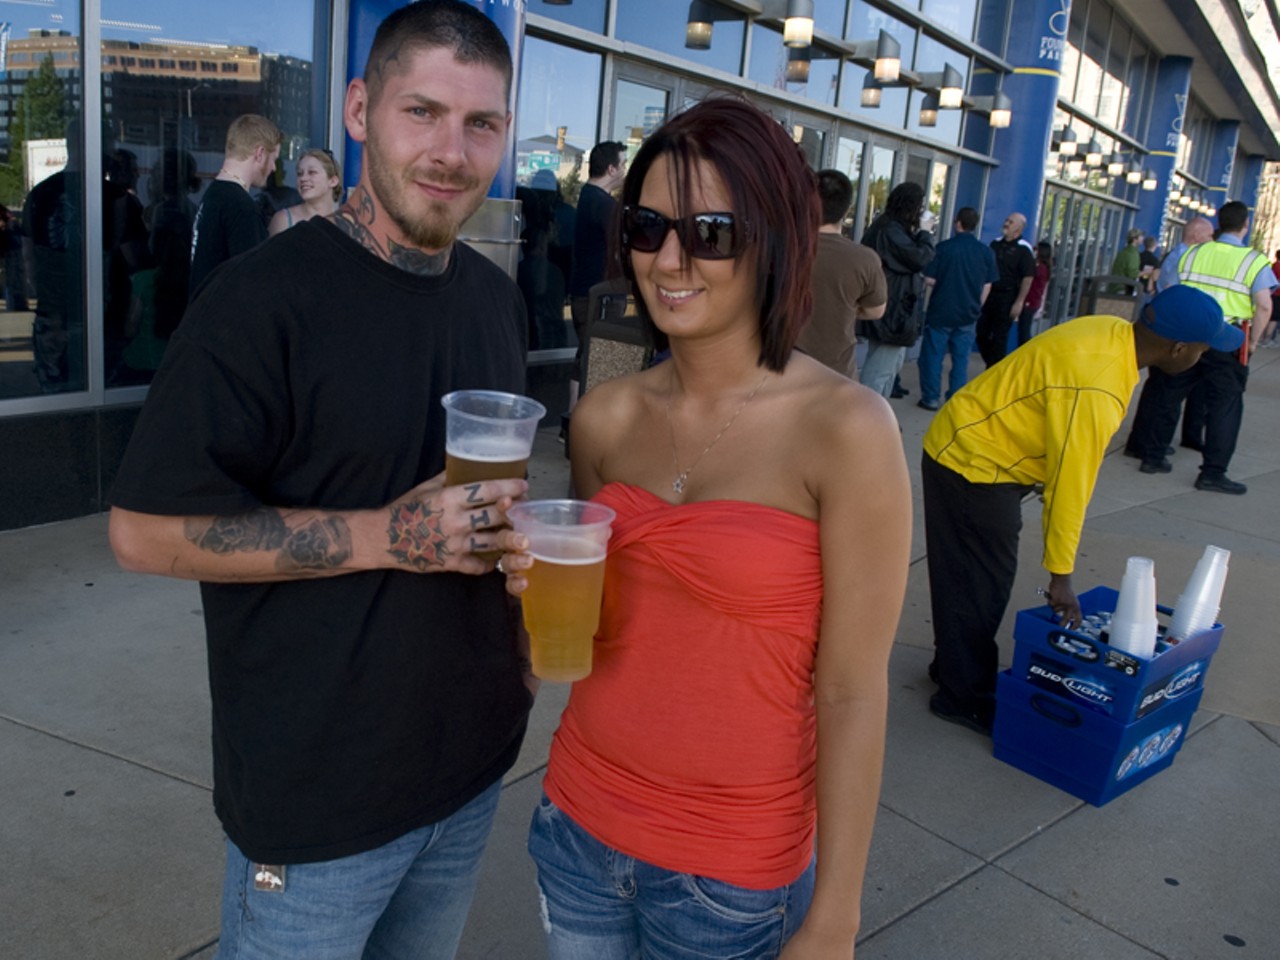 The Scottrade Center embraced the pre-concert tailgating philosophy by selling beer outside the venue before the show. Cheers!